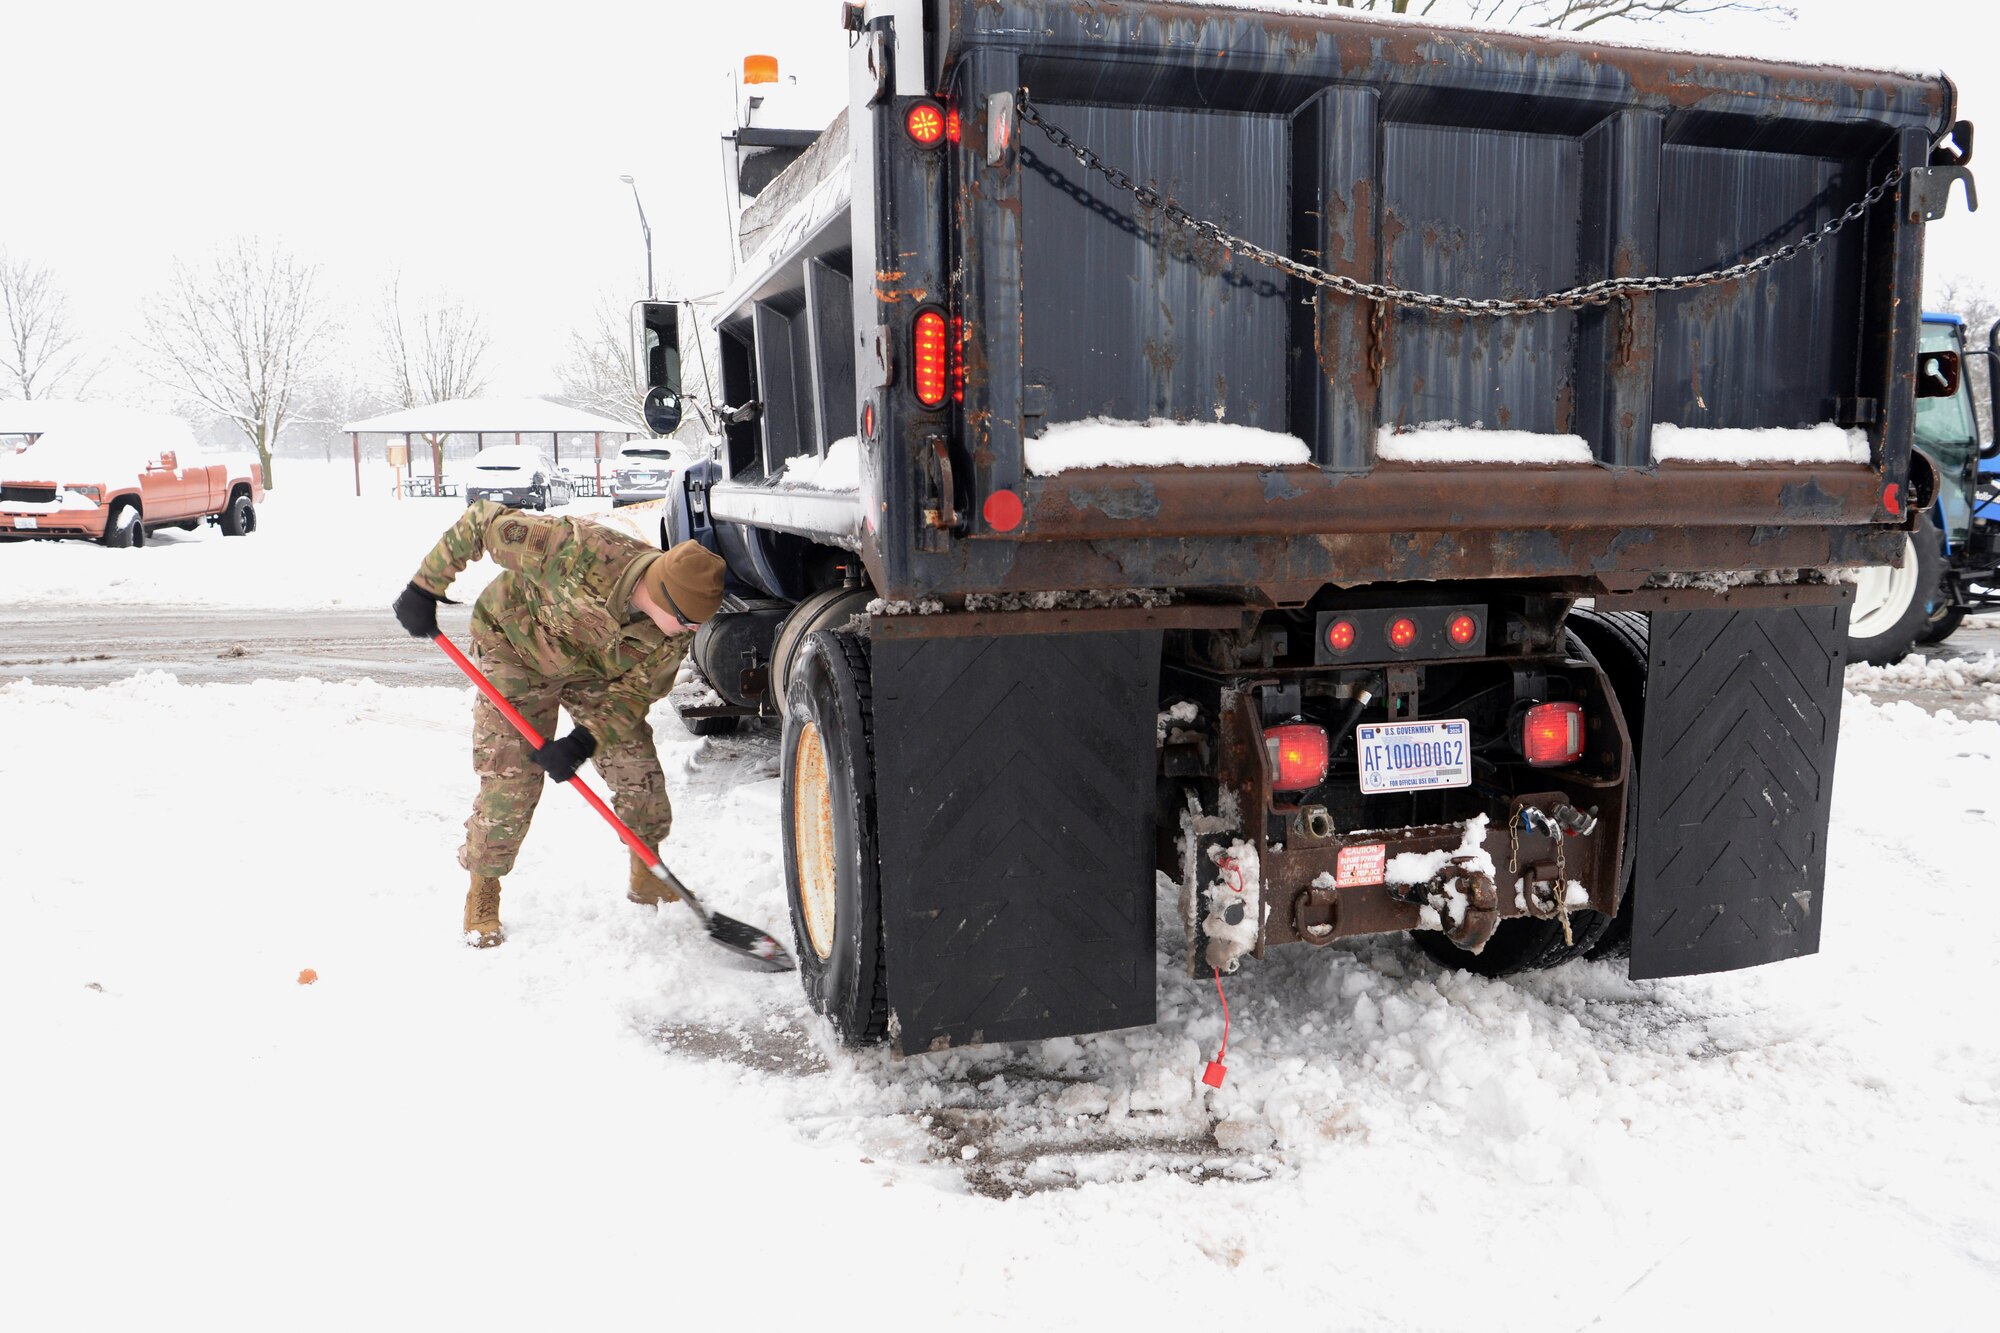 Tech. Sgt. Daniel Brown, 375th Civil Engineer Squadron locksmith NCO in charge, shovels snow away from the tires of a plow truck to give the truck enough traction to continue clearing roads Jan. 12, 2019, at Scott Air Force Base, Illinois. The initial road clearing process takes about three hours but must be continued for as long as the snow is falling to ensure motorists stay safe.